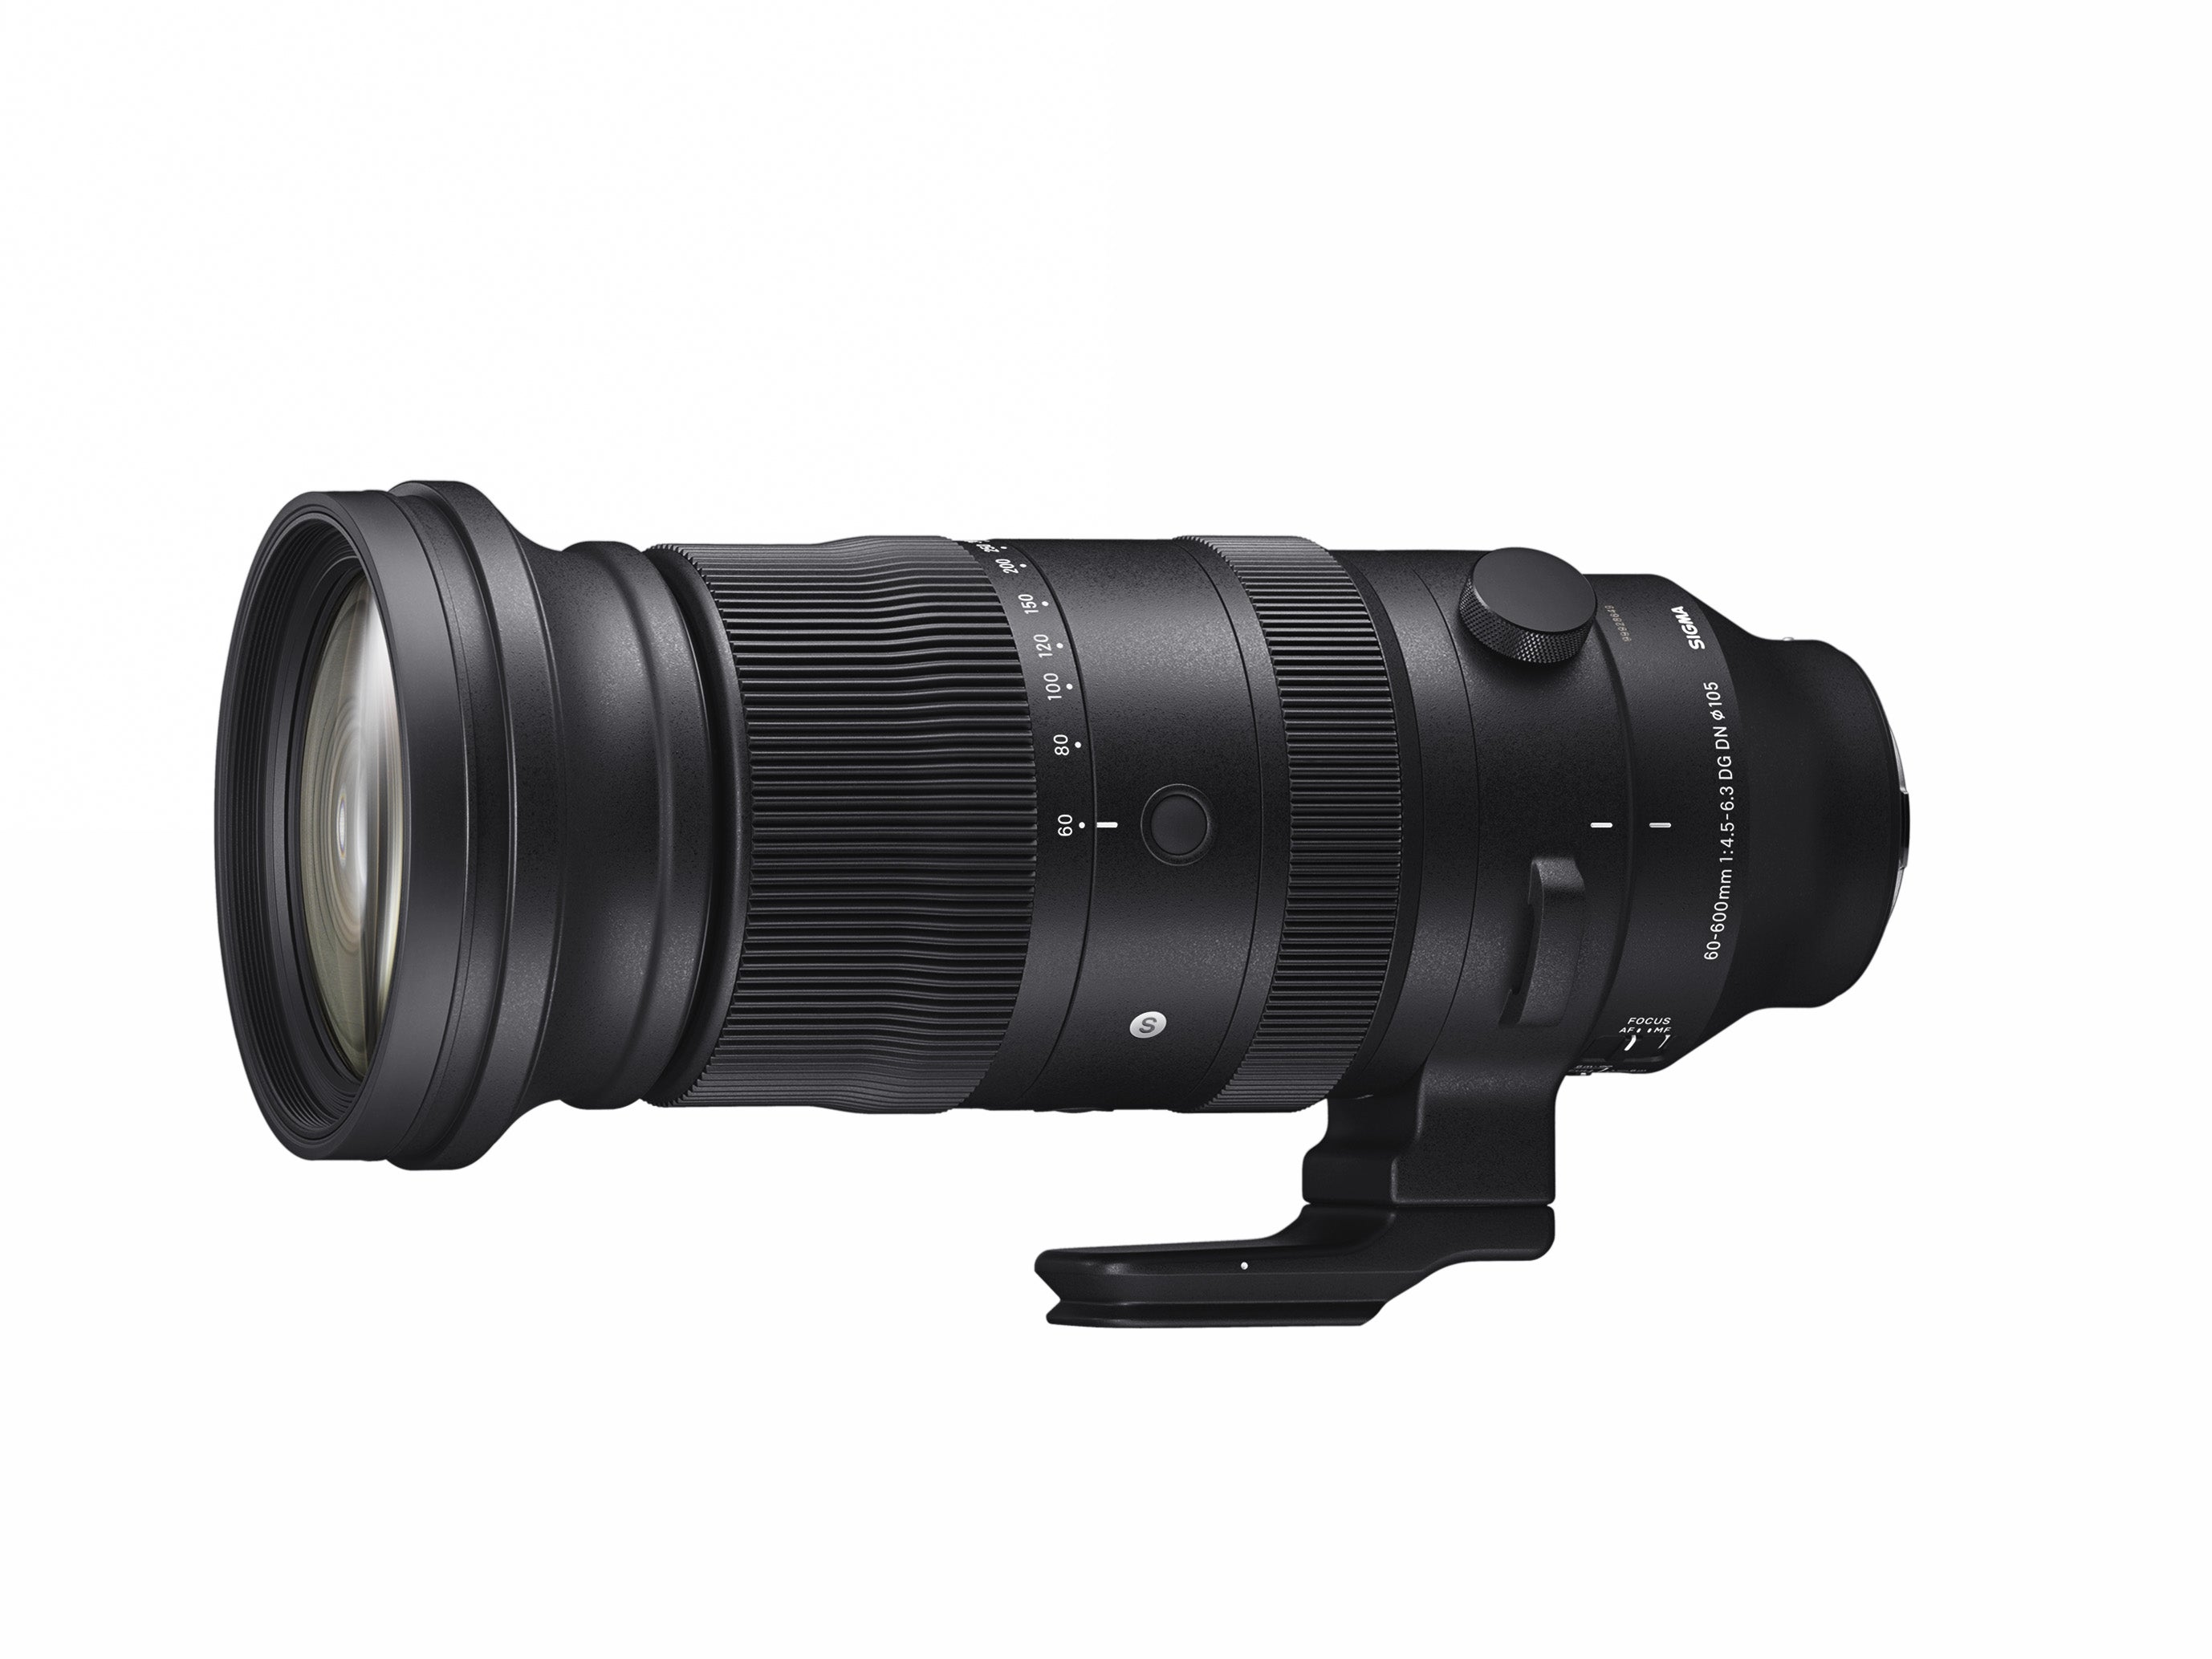 Product Image of Sigma 60-600mm F4.5-6.3 DG DN OS Sports Lens - L mount